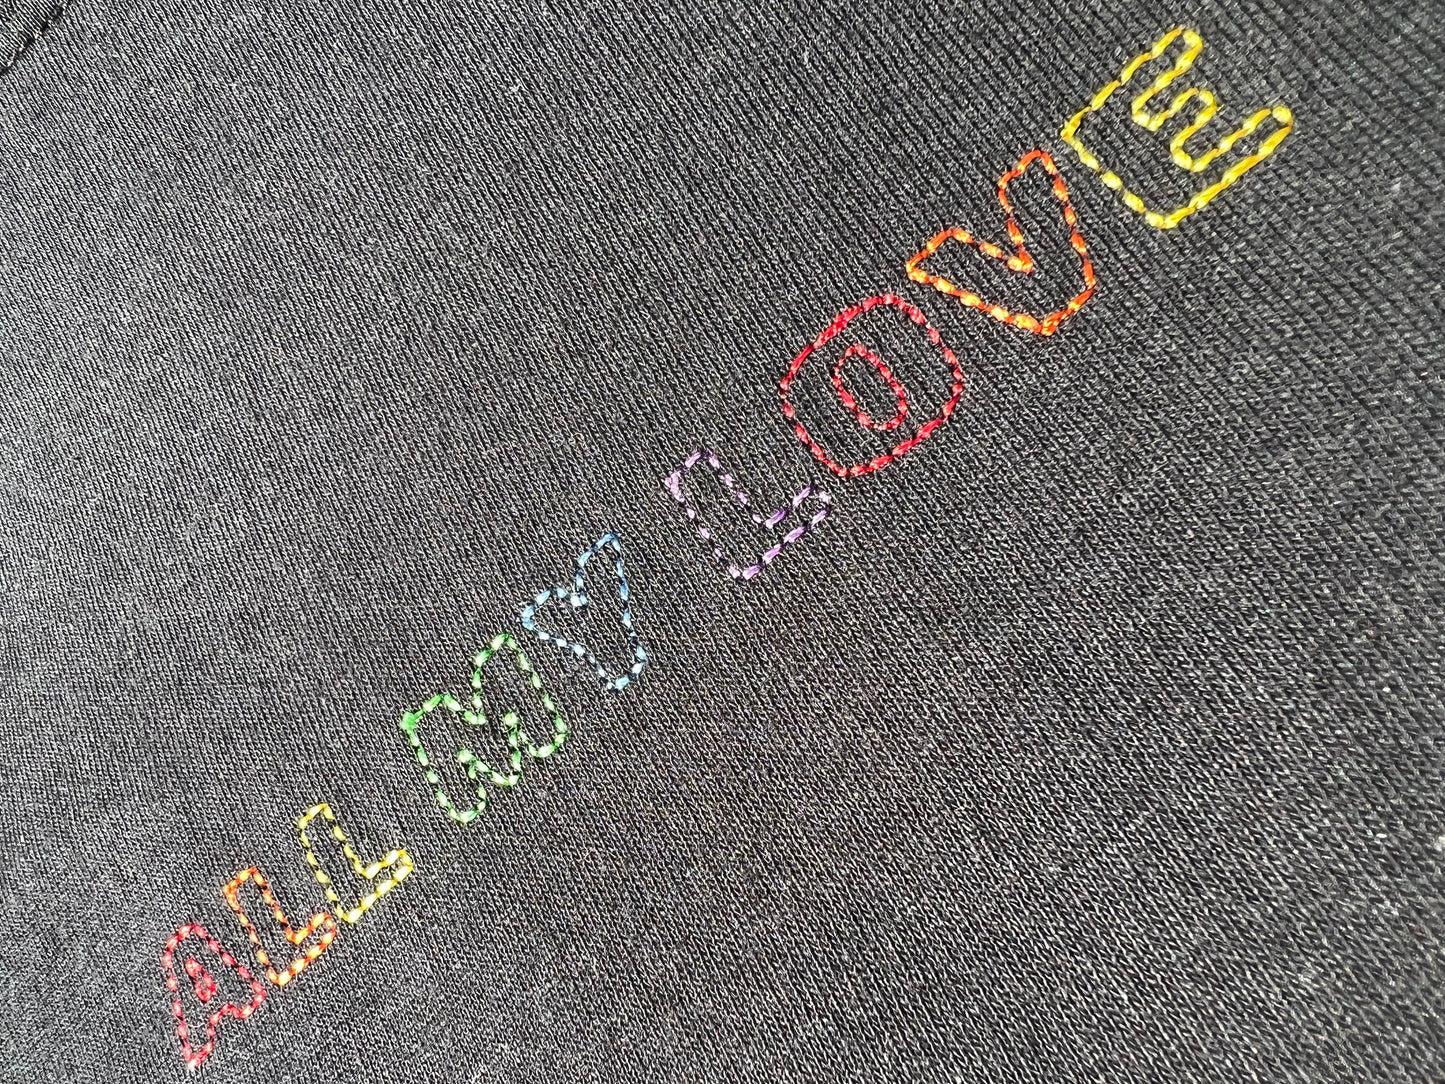 All My Love E.H Charity Embroidered T Shirt - Black/ White Rainbow